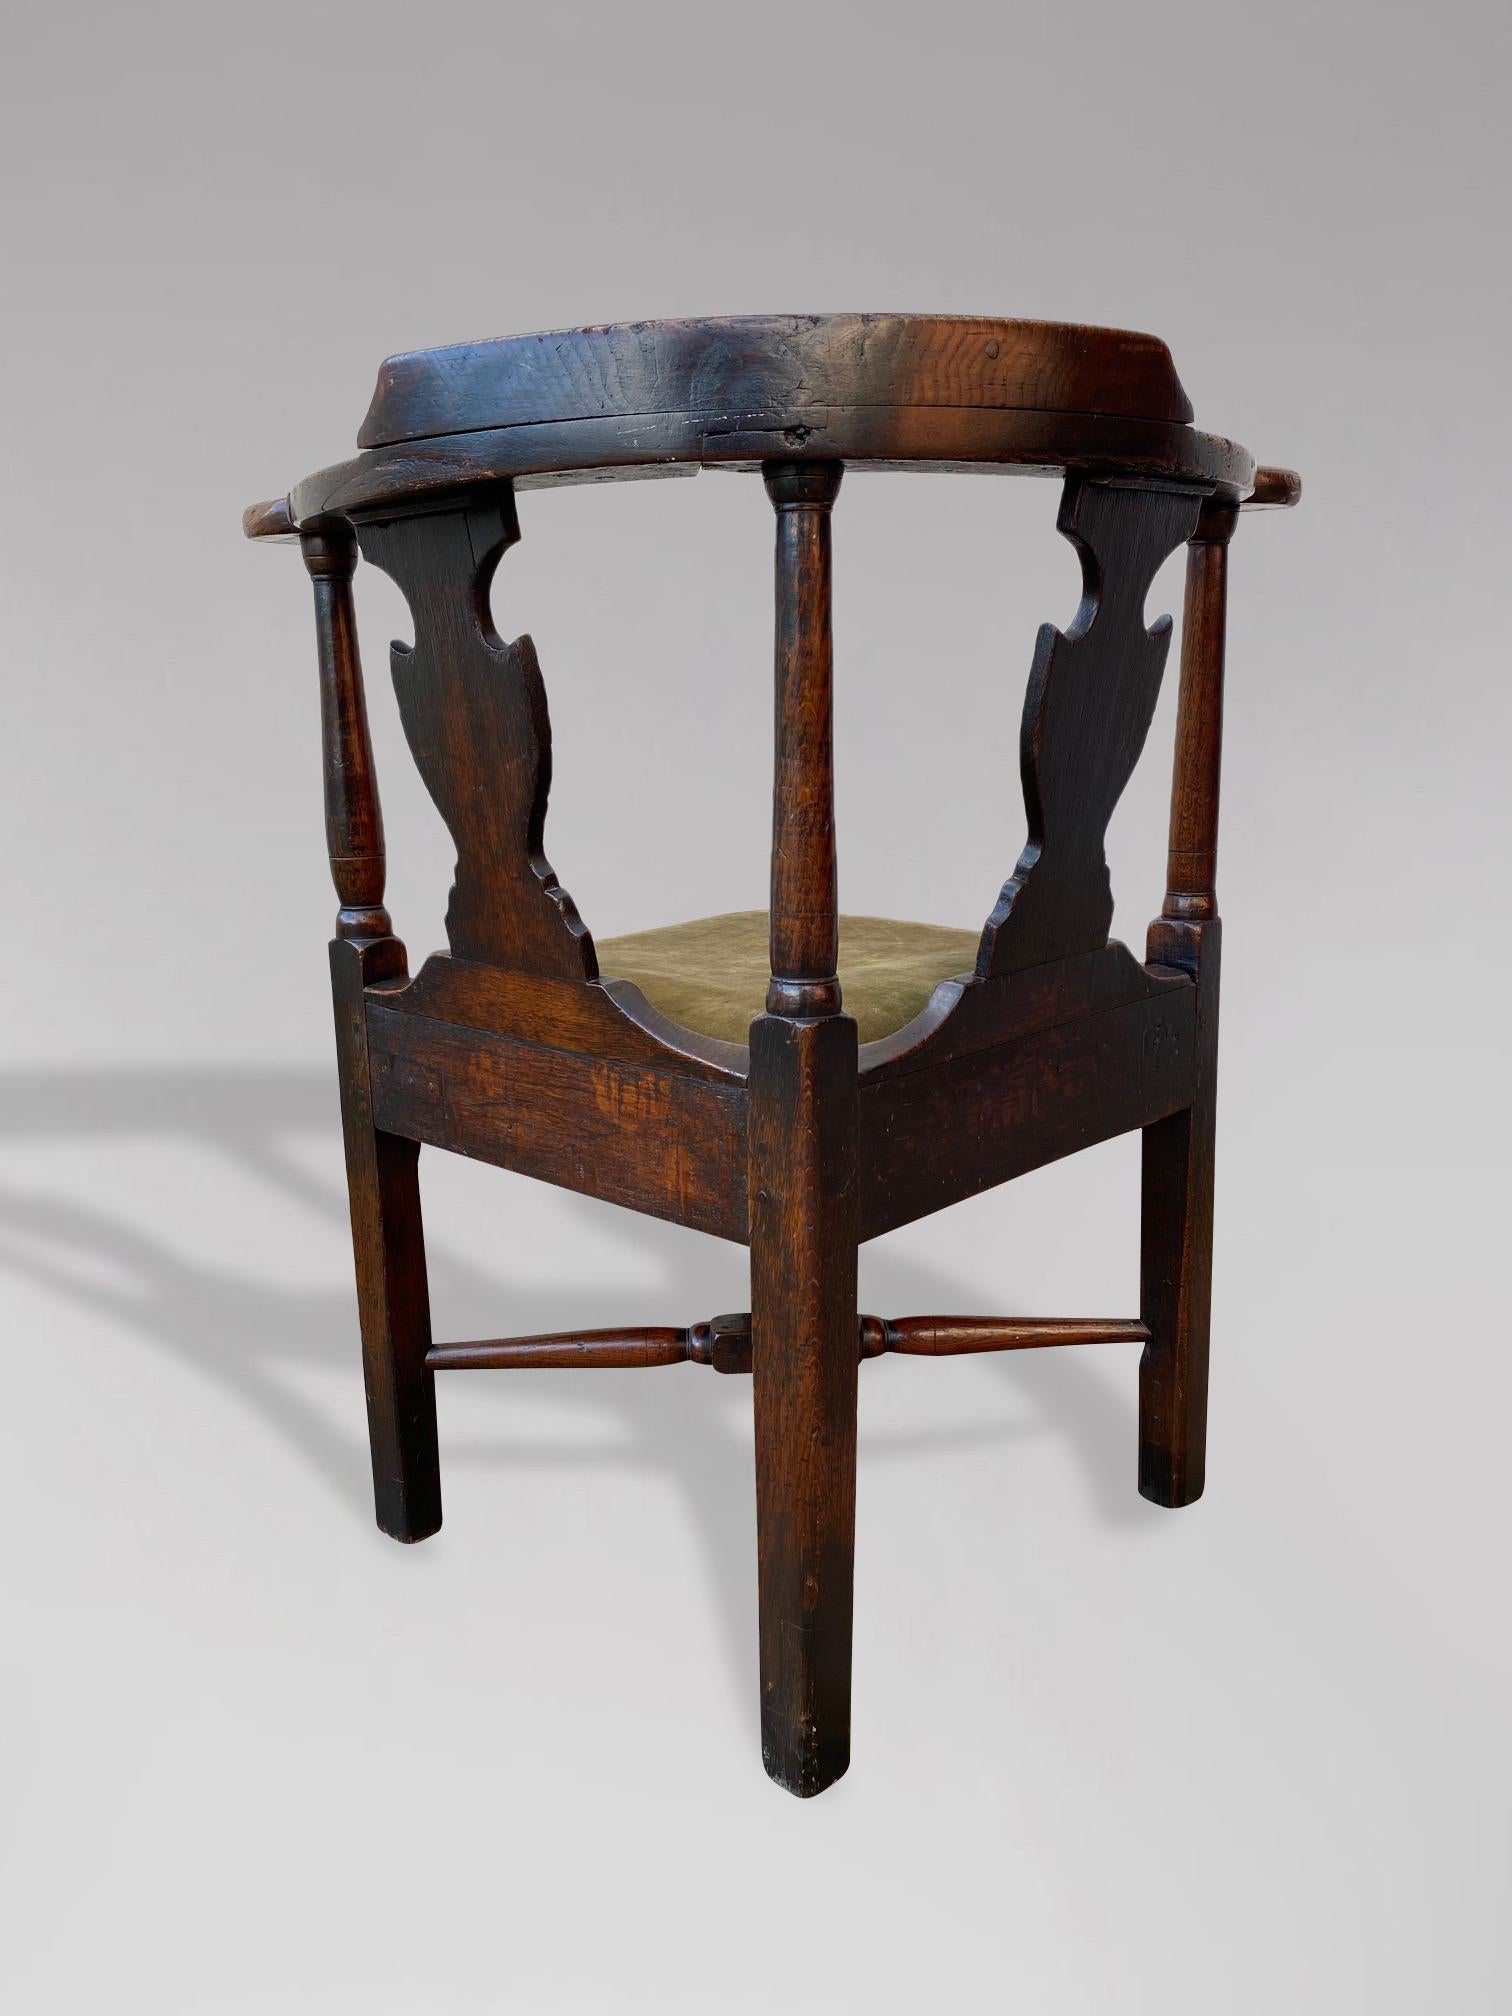 18th Century Oak Corner Chair, Circa 1790 In Good Condition For Sale In Petworth,West Sussex, GB